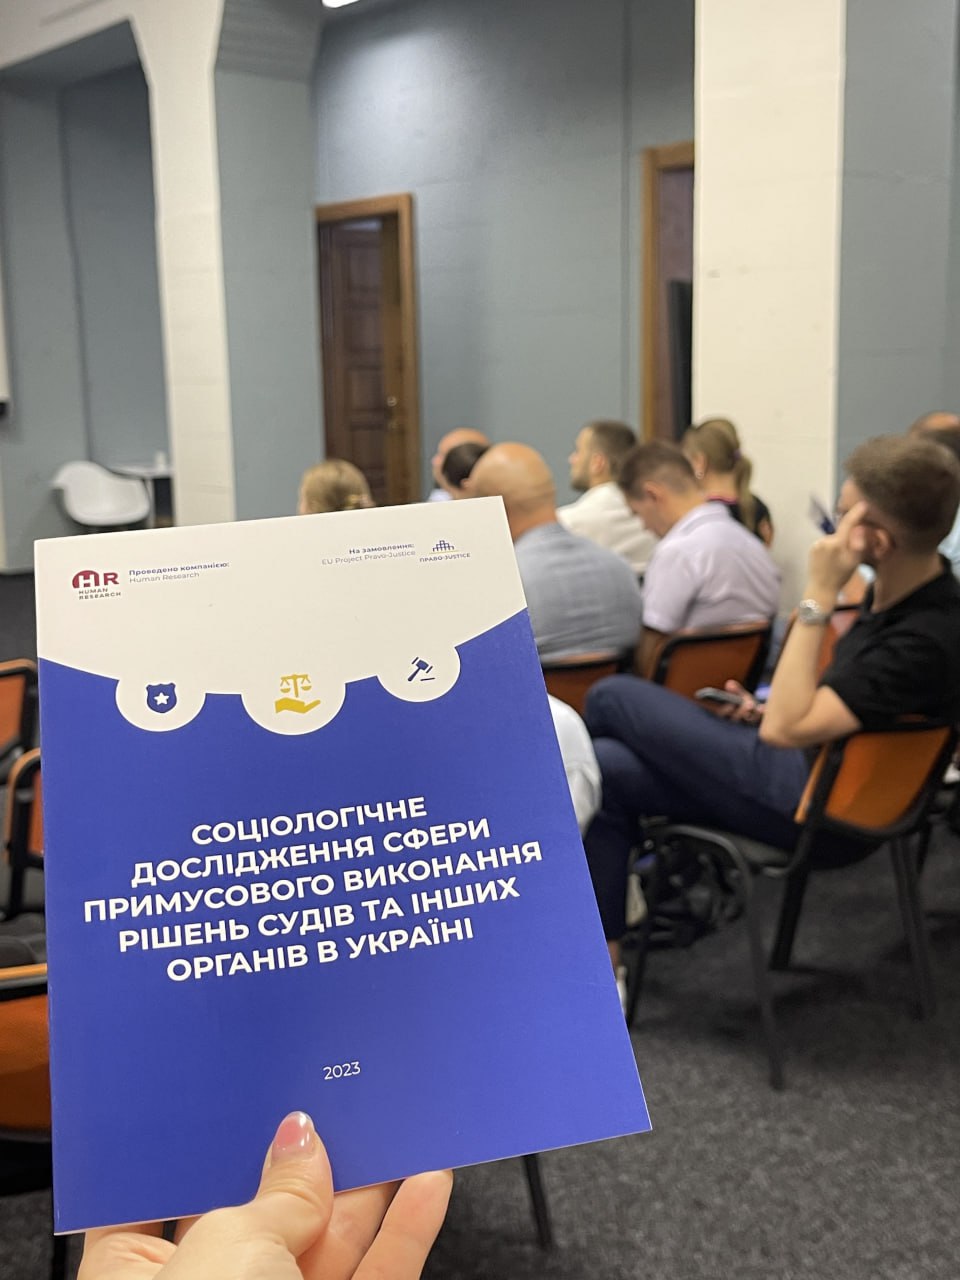 Study of the Area of Enforcement of Decisions of Courts and Other Bodies in Ukraine Was Presented to the Public